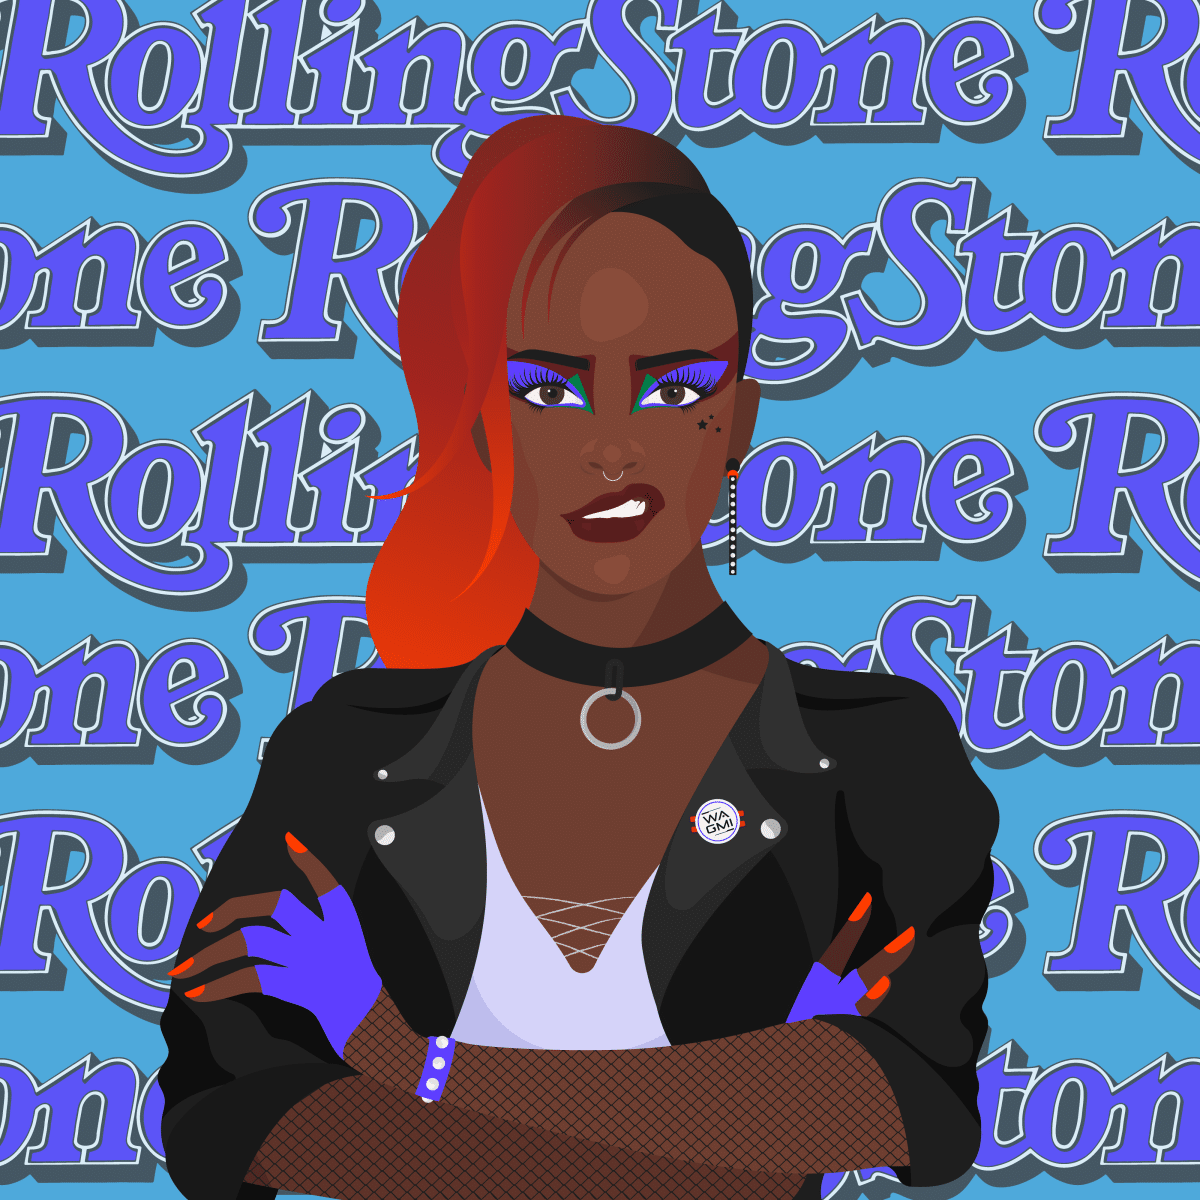 Female avatar in a black jacket with a rolling stone logo in the background